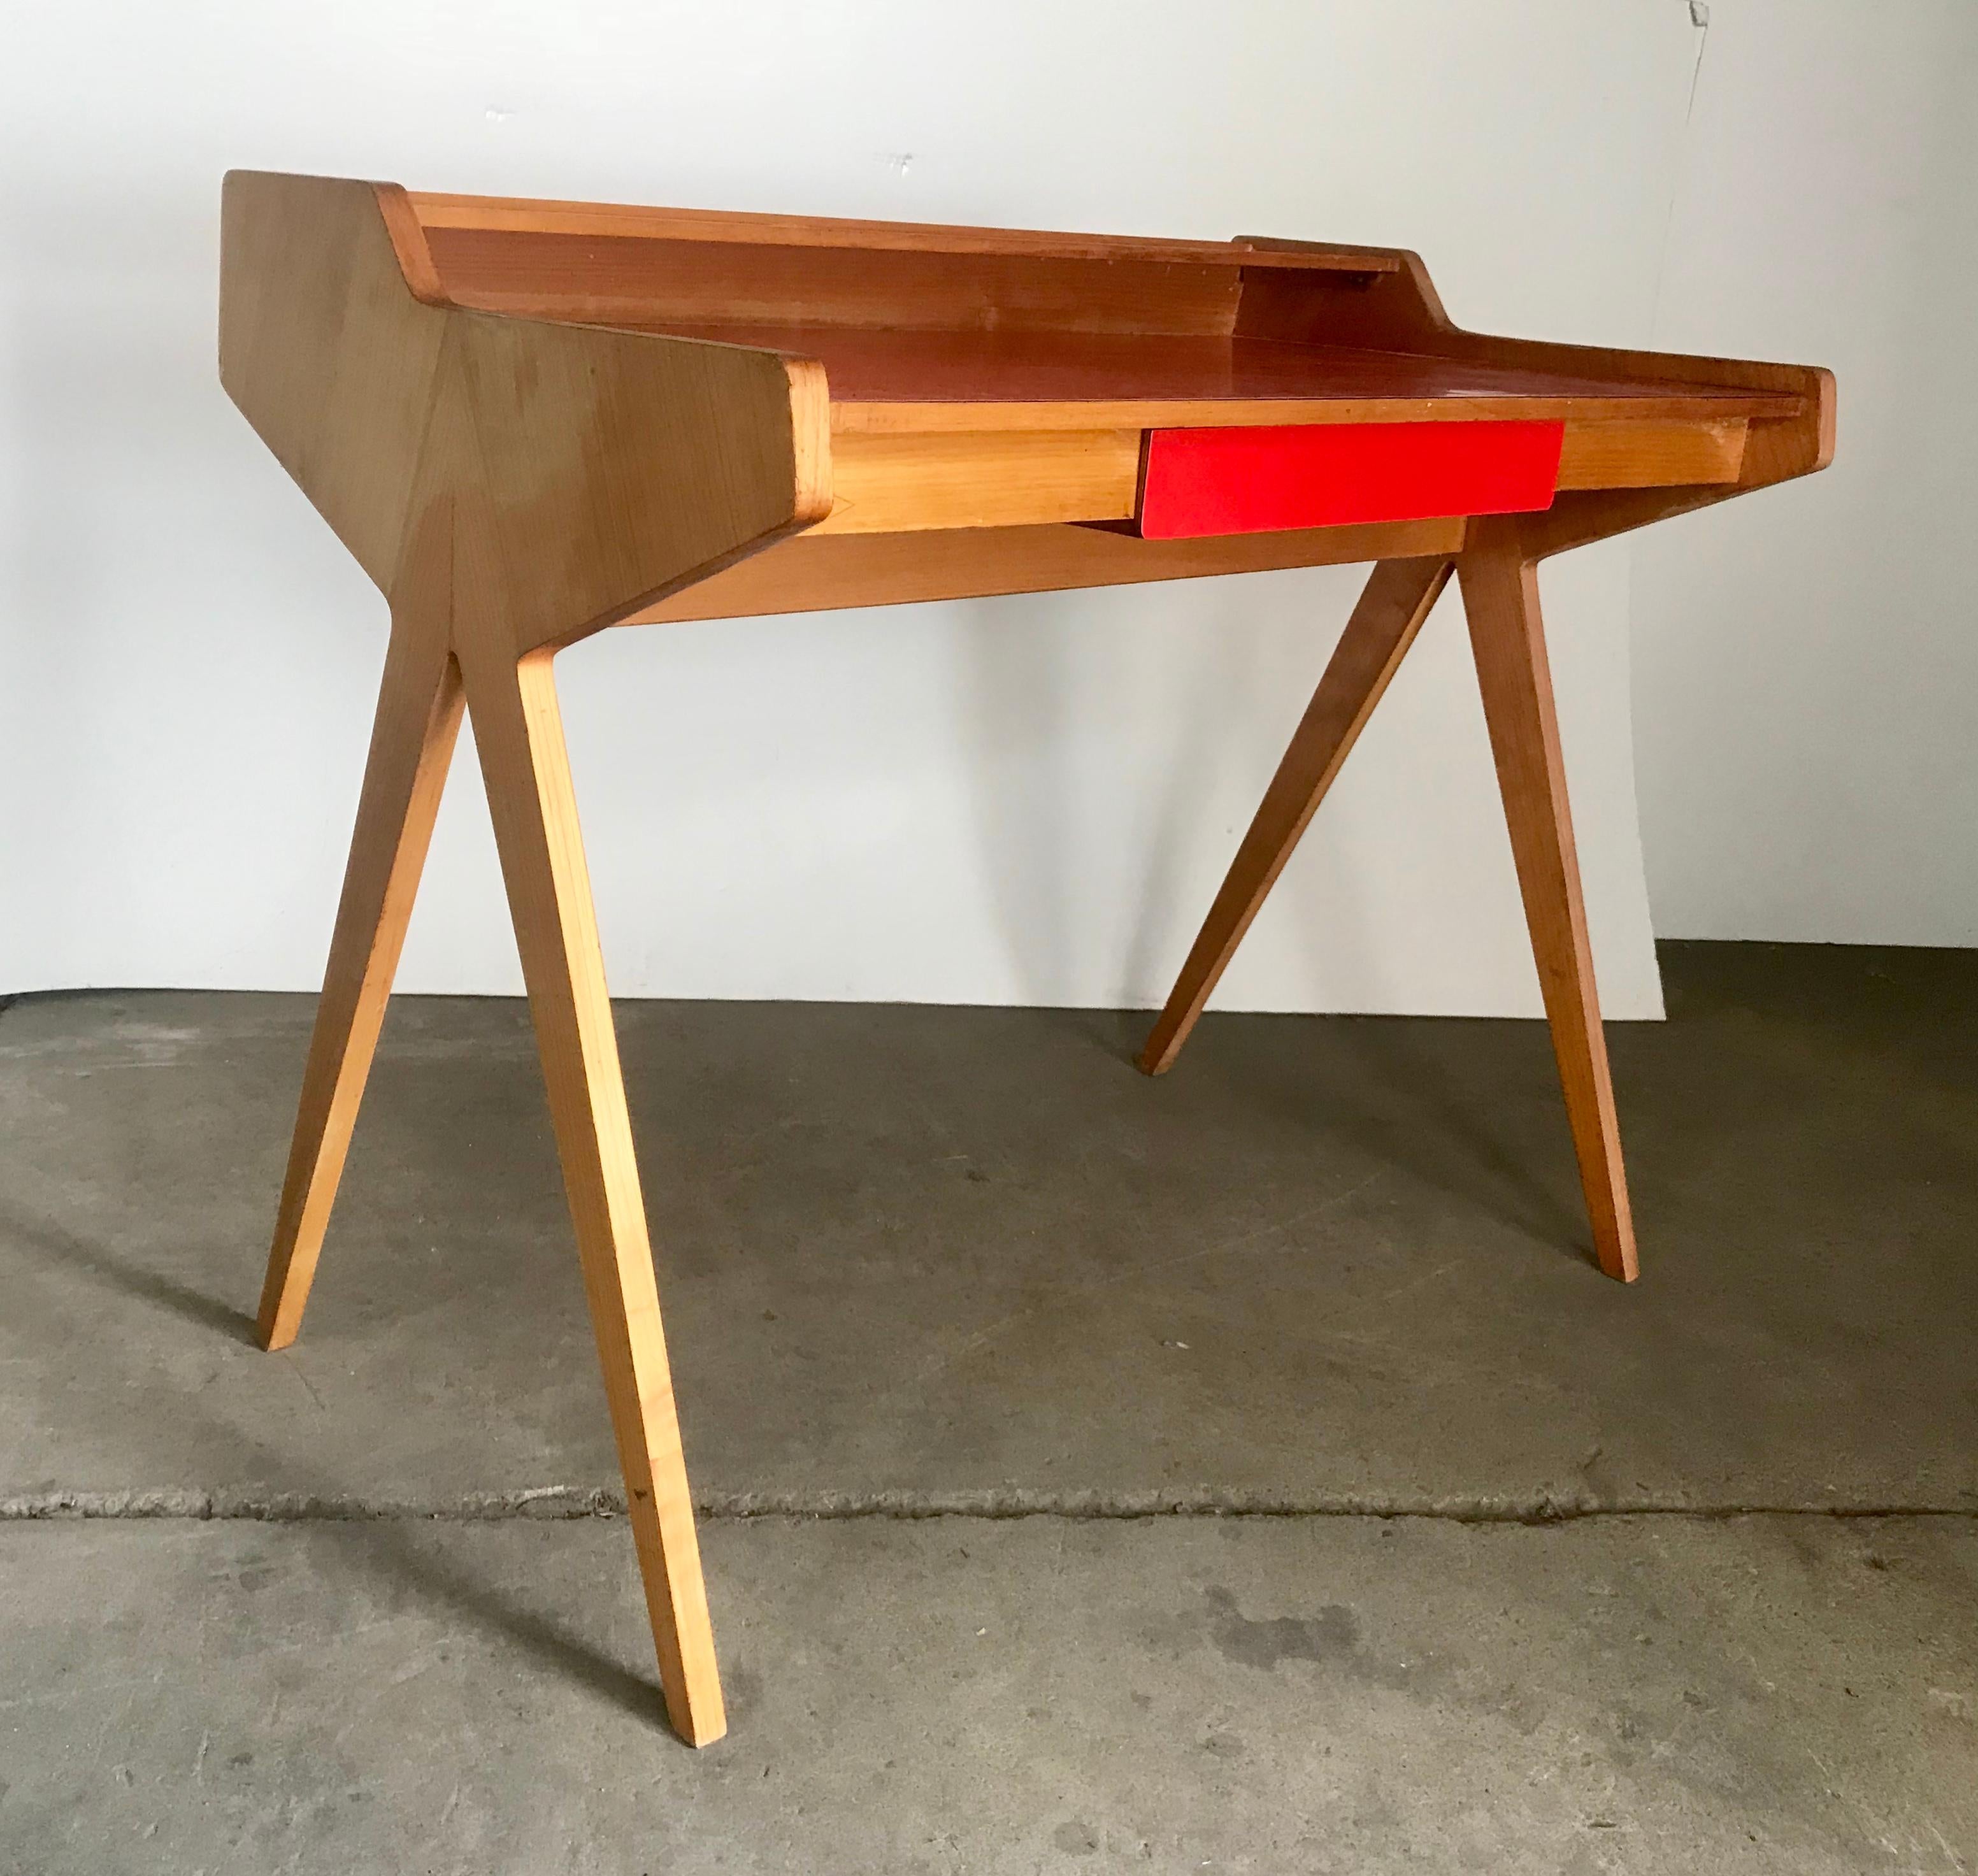 Lacquered Modernist Writing Table or desk by Helmut Magg for WK Möbel Germany, 1955